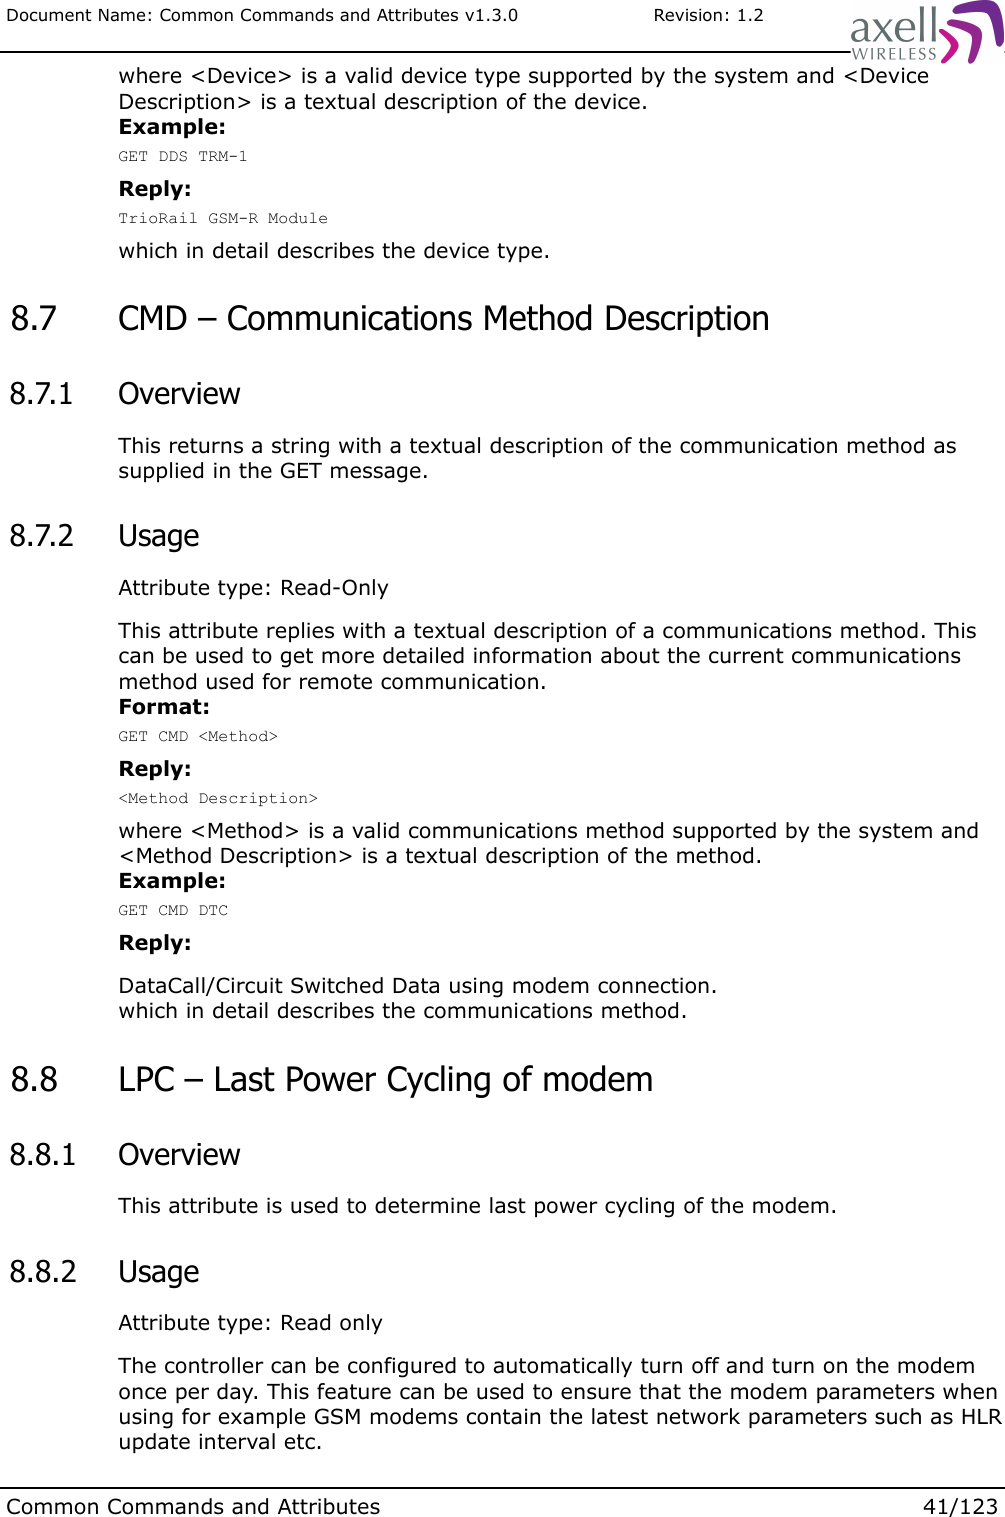 Document Name: Common Commands and Attributes v1.3.0                       Revision: 1.2where &lt;Device&gt; is a valid device type supported by the system and &lt;Device Description&gt; is a textual description of the device. Example:GET DDS TRM-1Reply:TrioRail GSM-R Modulewhich in detail describes the device type. 8.7  CMD – Communications Method Description 8.7.1  OverviewThis returns a string with a textual description of the communication method as supplied in the GET message. 8.7.2  UsageAttribute type: Read-OnlyThis attribute replies with a textual description of a communications method. This can be used to get more detailed information about the current communications method used for remote communication.Format:GET CMD &lt;Method&gt;Reply:&lt;Method Description&gt;where &lt;Method&gt; is a valid communications method supported by the system and &lt;Method Description&gt; is a textual description of the method. Example:GET CMD DTCReply:DataCall/Circuit Switched Data using modem connection.which in detail describes the communications method. 8.8  LPC – Last Power Cycling of modem 8.8.1  OverviewThis attribute is used to determine last power cycling of the modem. 8.8.2  UsageAttribute type: Read onlyThe controller can be configured to automatically turn off and turn on the modem once per day. This feature can be used to ensure that the modem parameters when using for example GSM modems contain the latest network parameters such as HLR update interval etc.Common Commands and Attributes 41/123